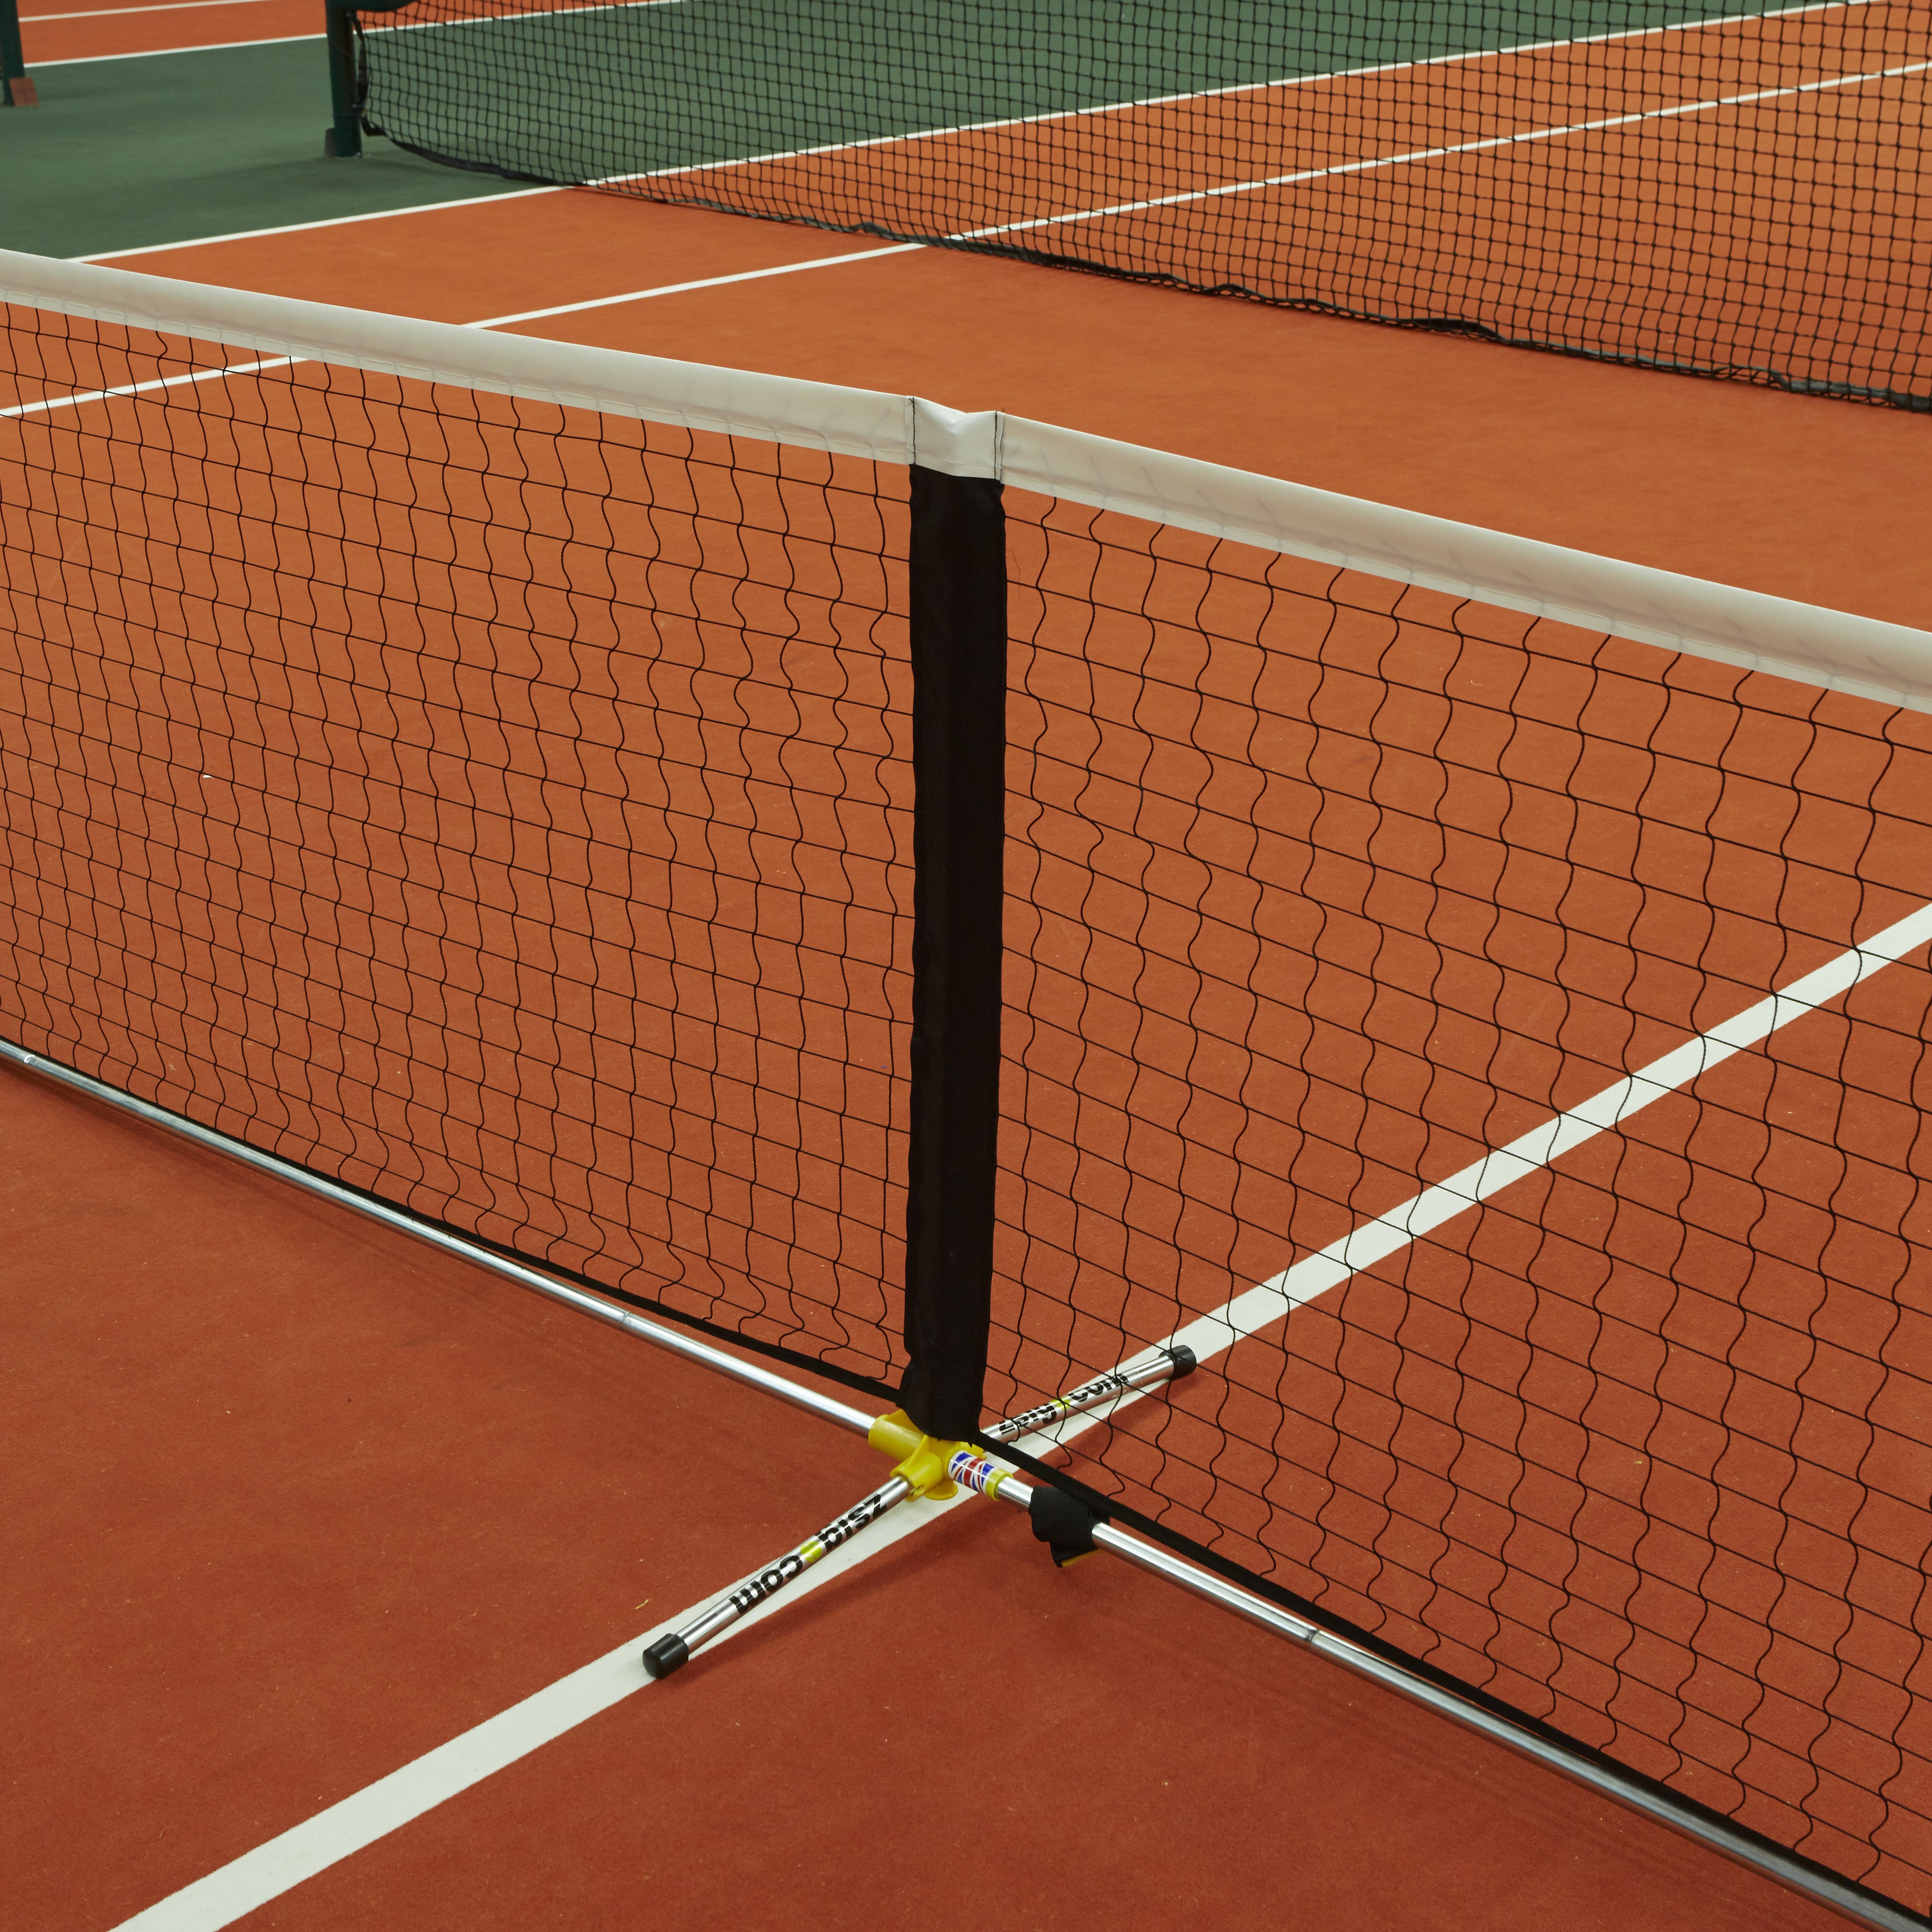 Tennis Net: full-size portable Zsignet 48 with centre post support.